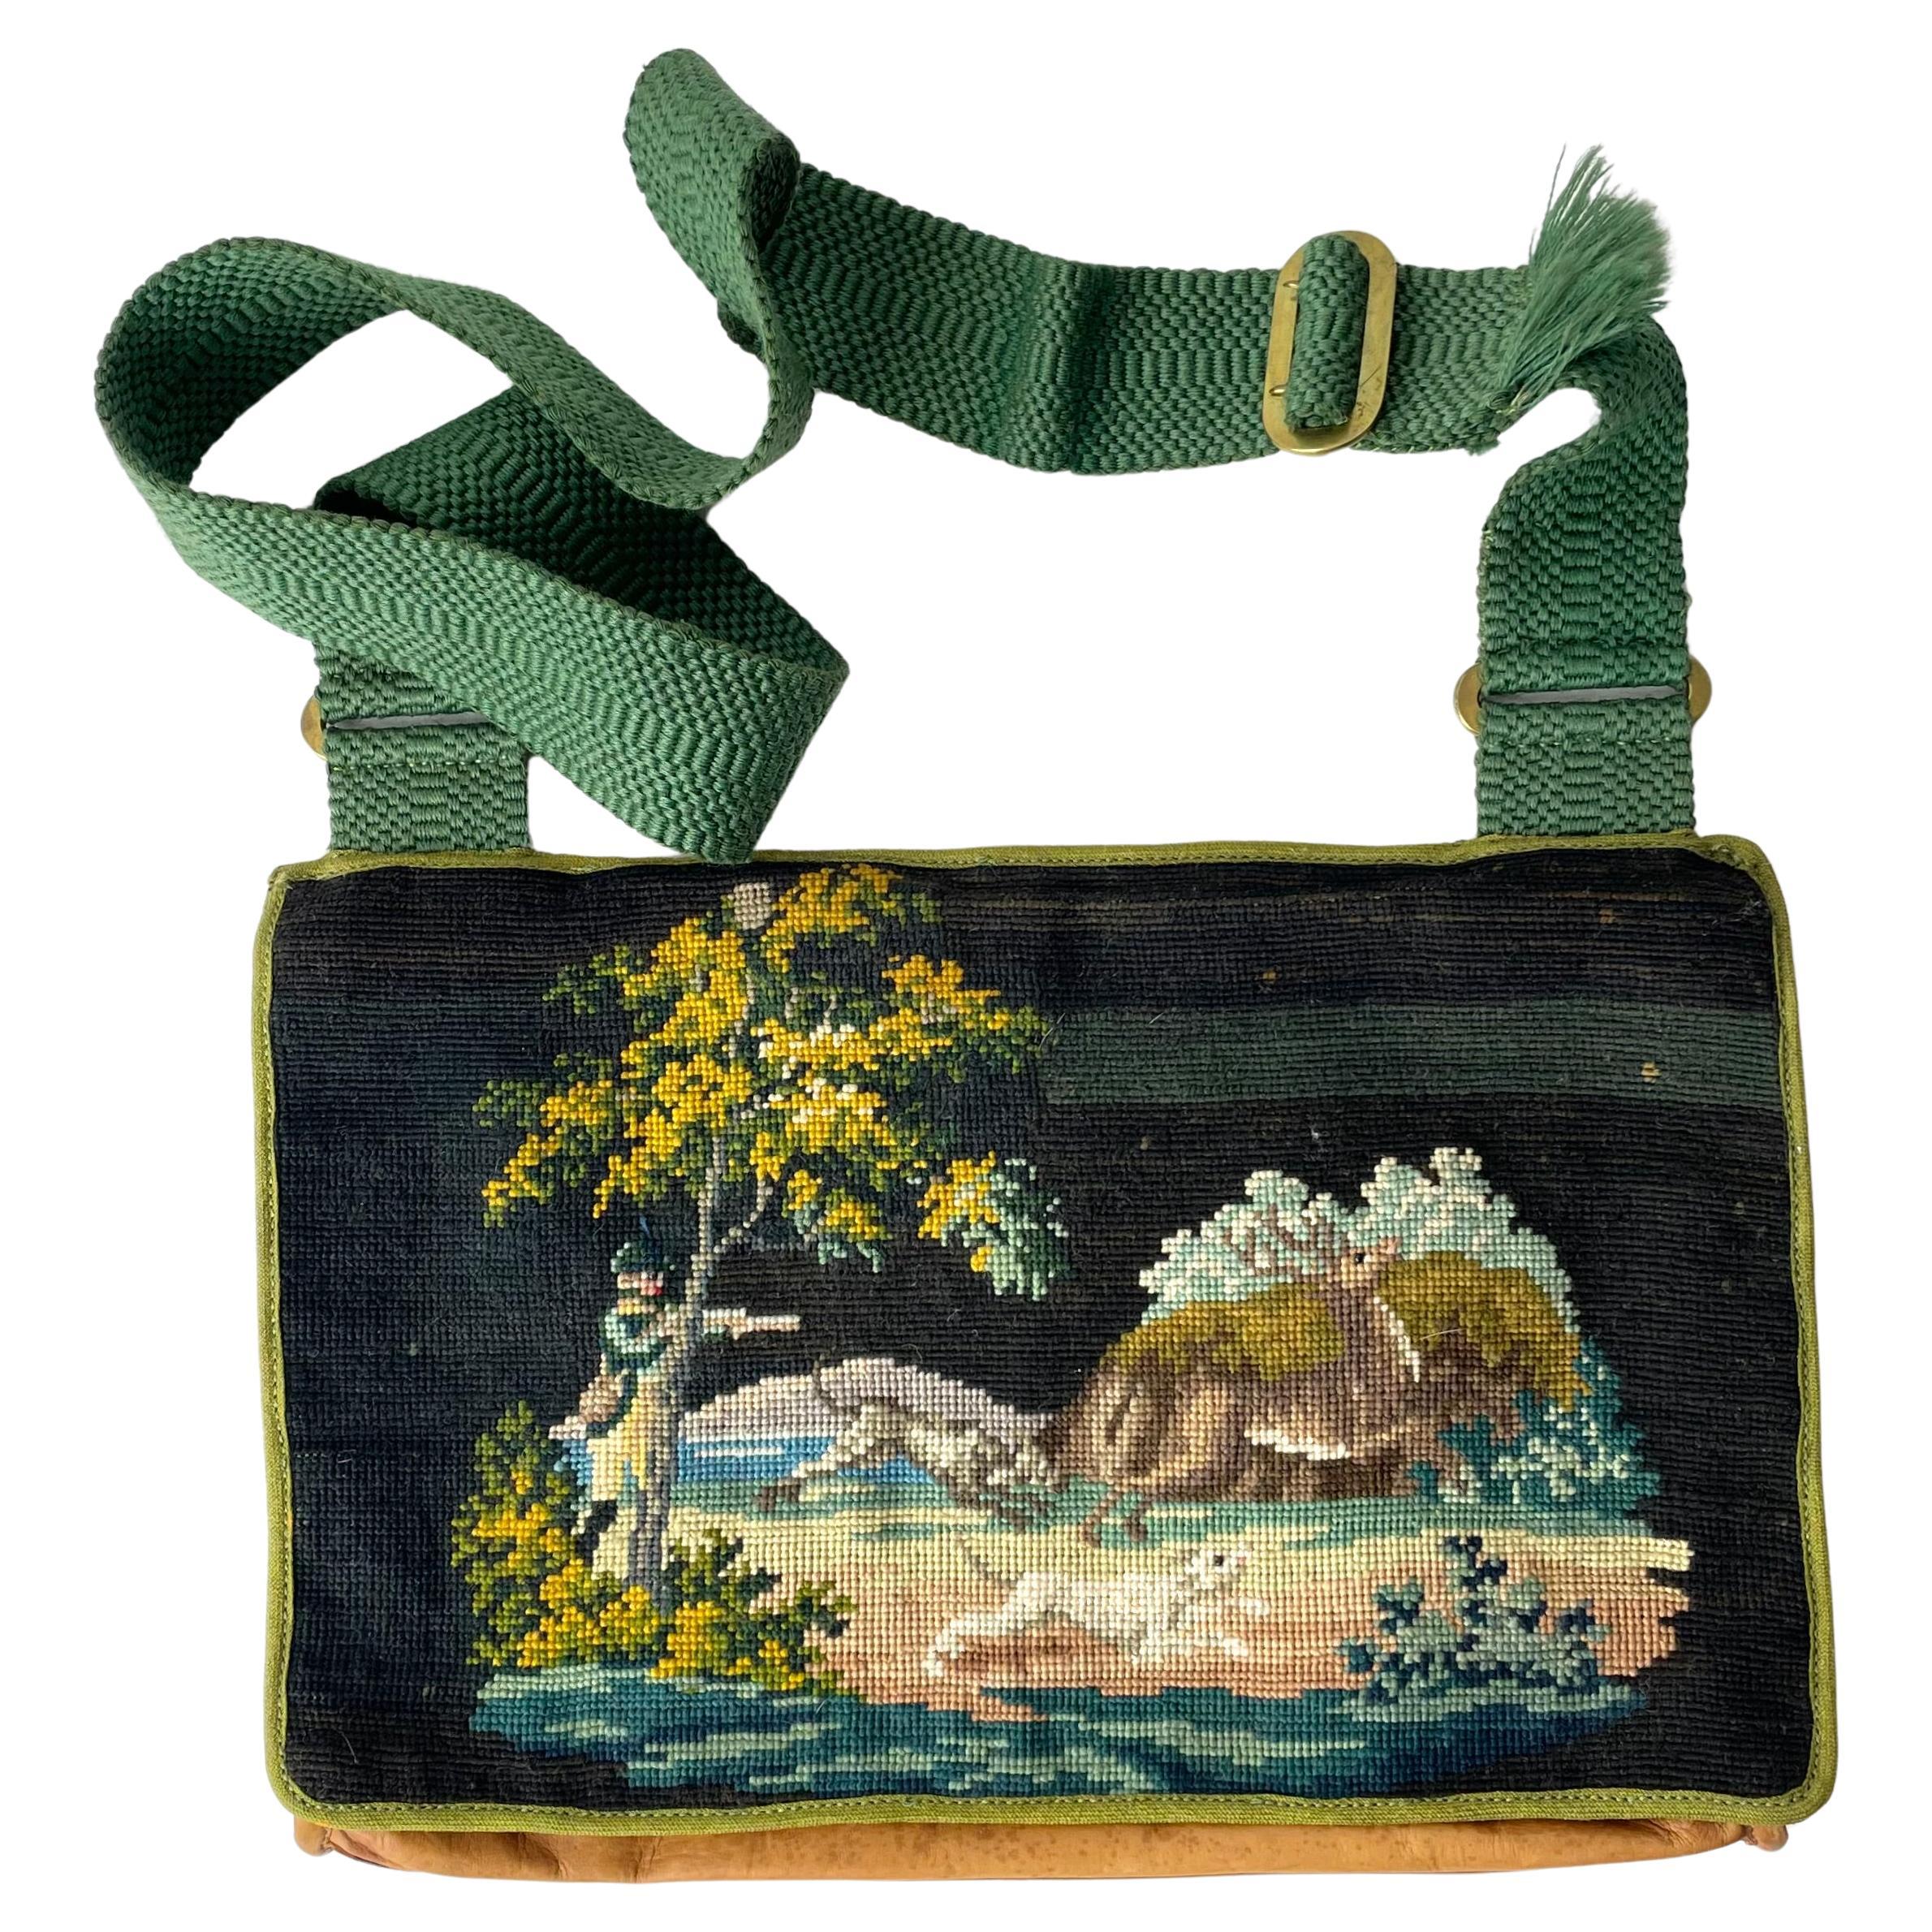 Hunting Bag in leather with Petit Point decor from a hunting scene. 19th Century